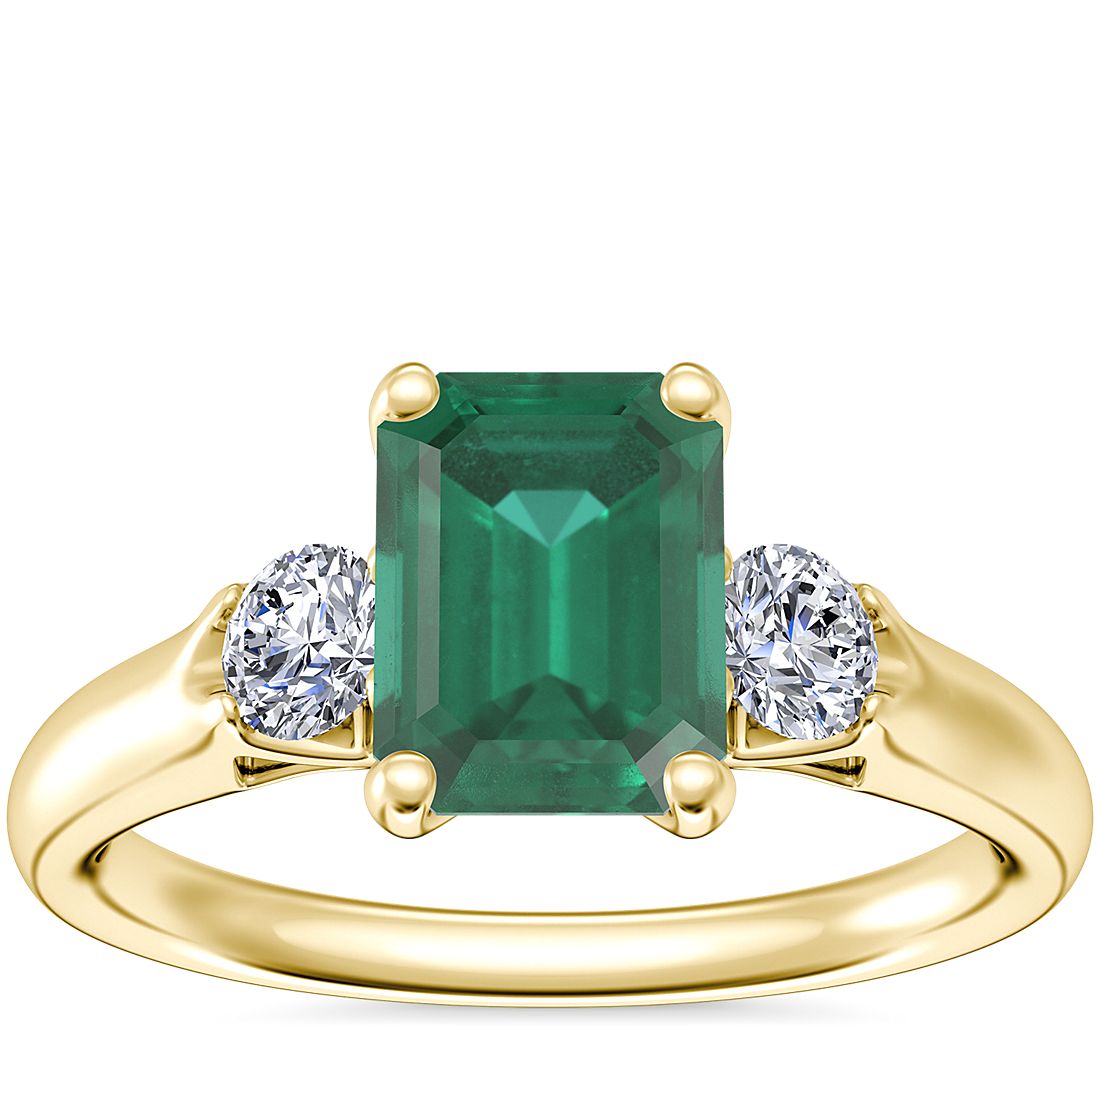 Classic Three Stone Engagement Ring with Emerald-Cut Emerald in 18k Yellow Gold (8x6mm)